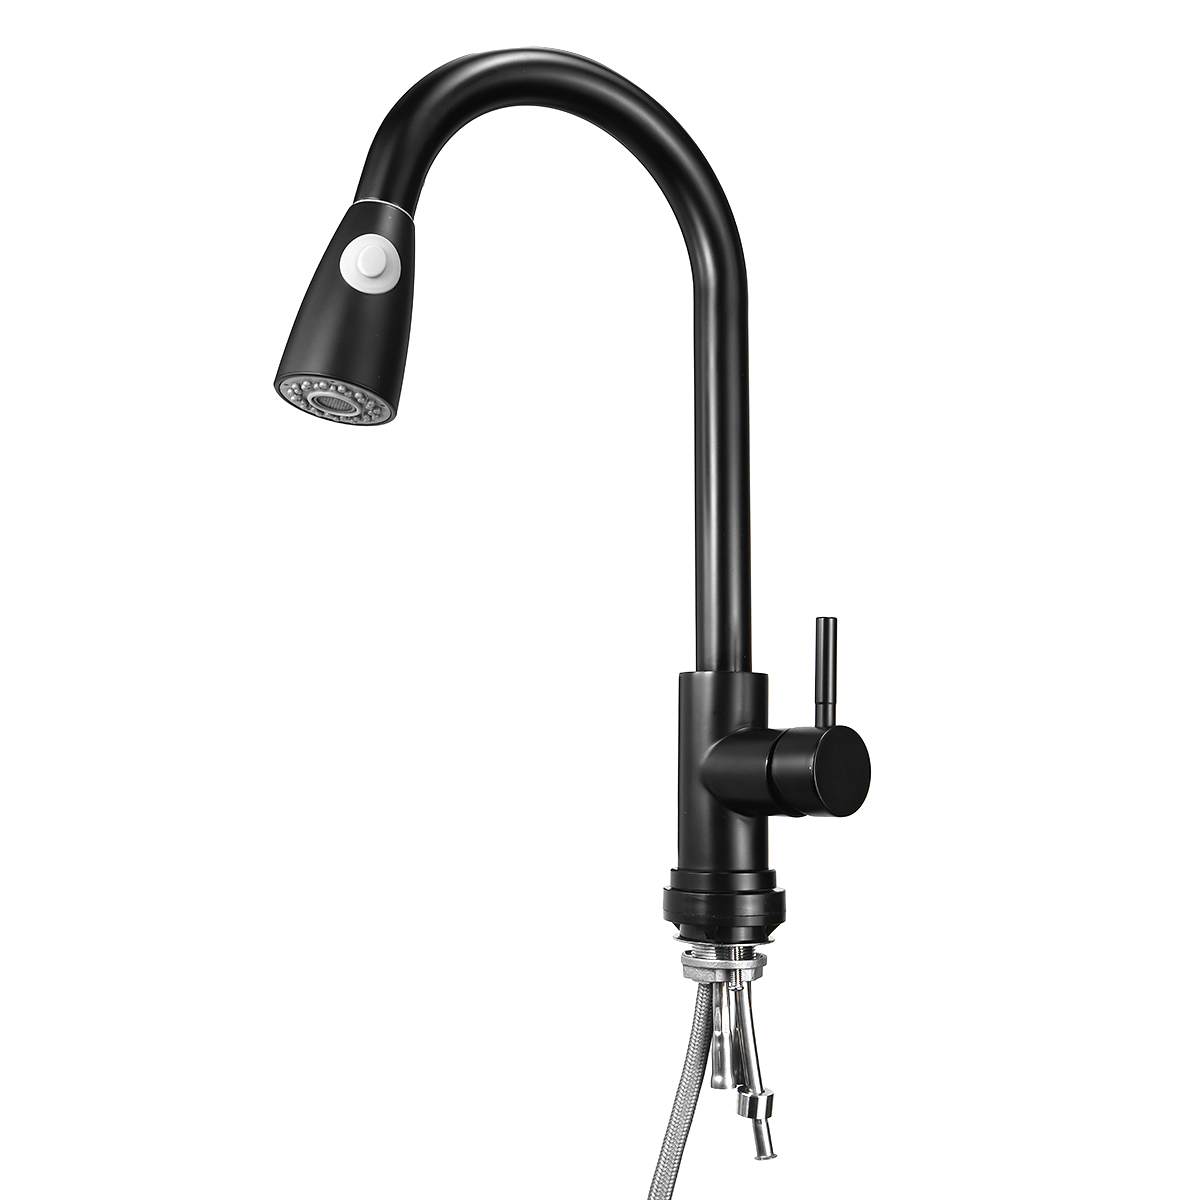 Stoneway Kitchen Sink Faucet with Pull Down Sprayer Black, High Arc Single Handle with Hose, Commercial Modern rv Solid Brass, Matte Black - image 2 of 7